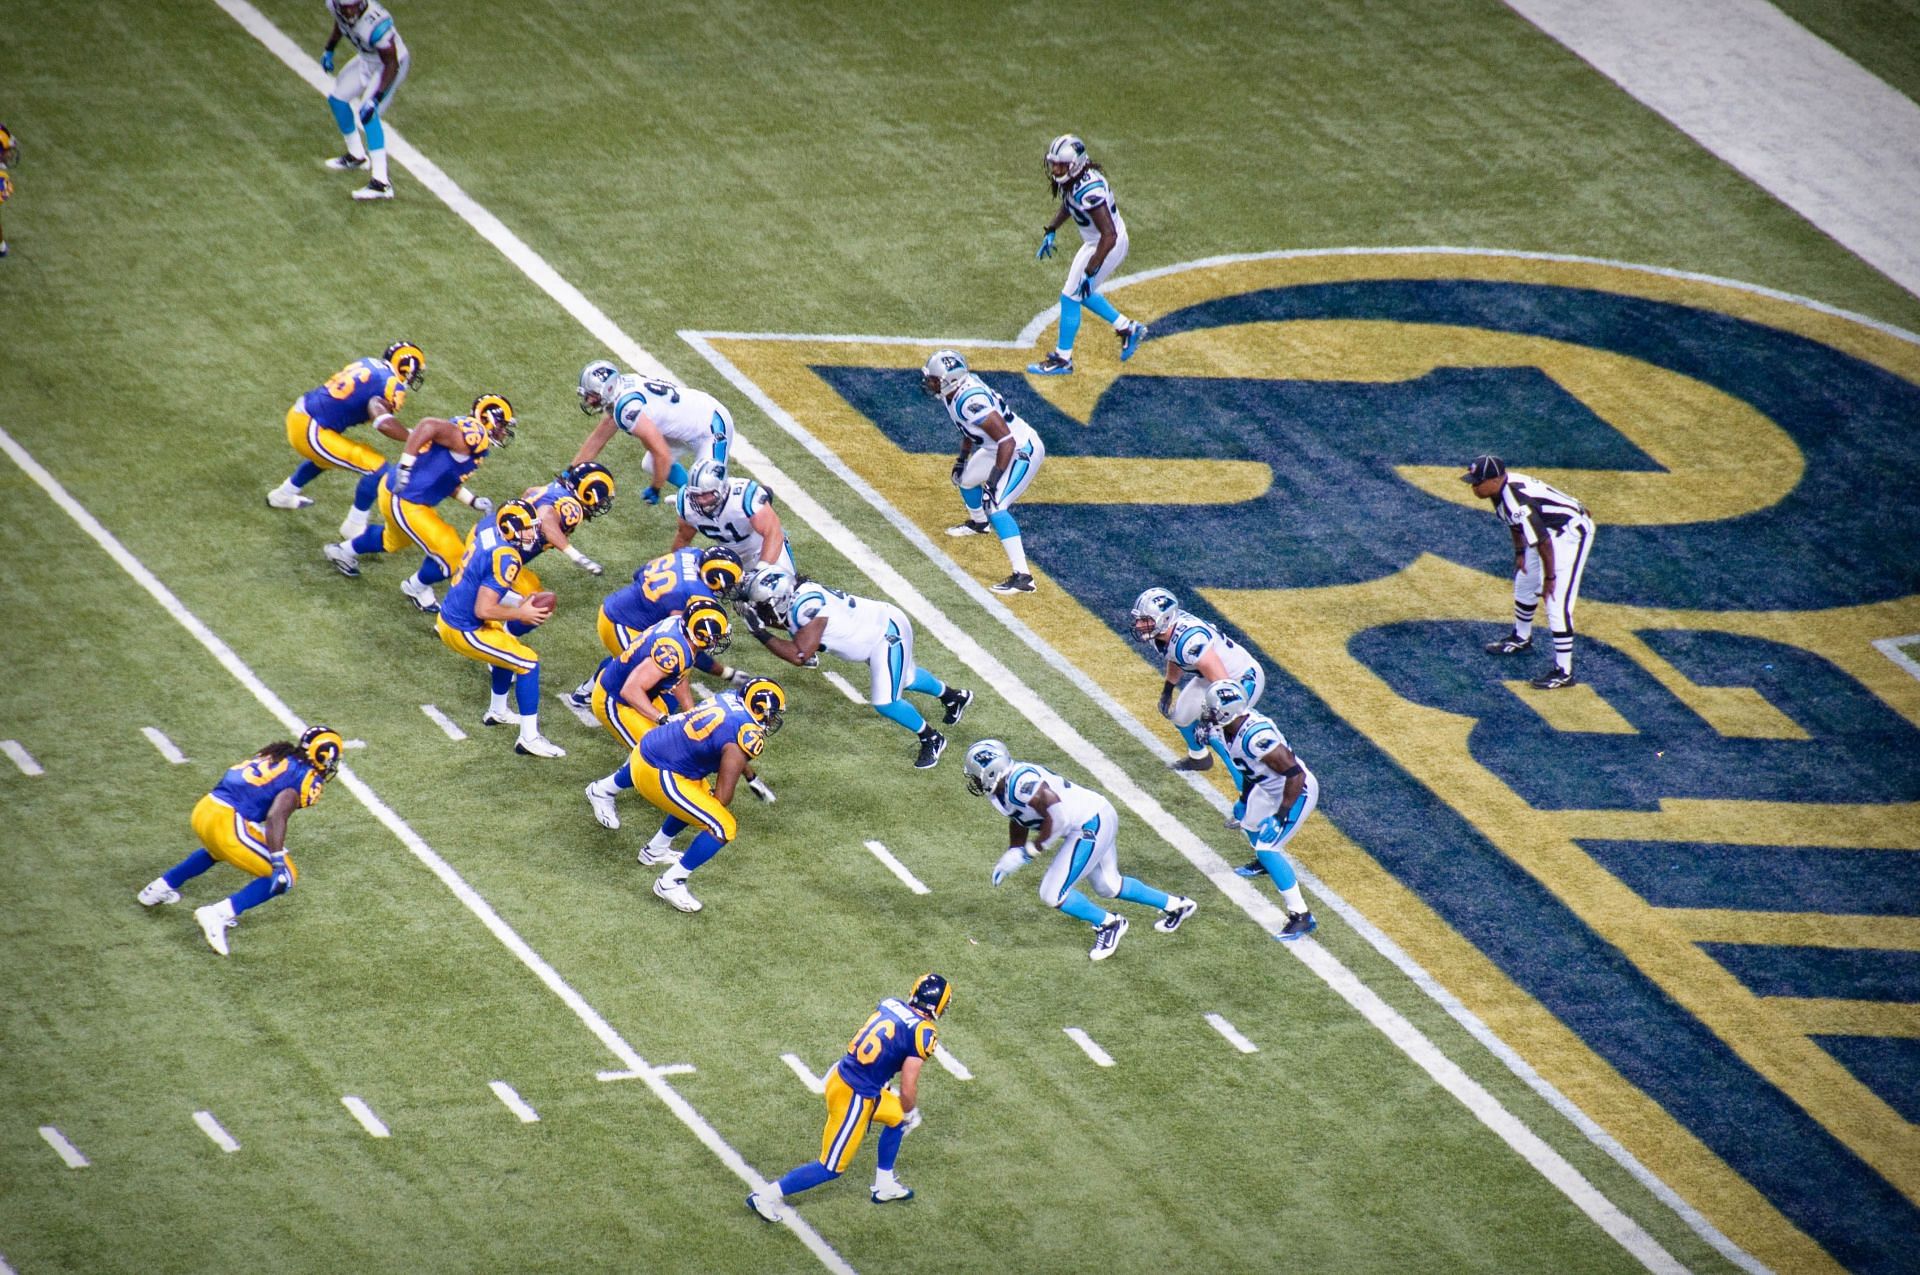 The St Louis Rams playing the Carolina Panthers back in 2010 (Image: Wikipedia)